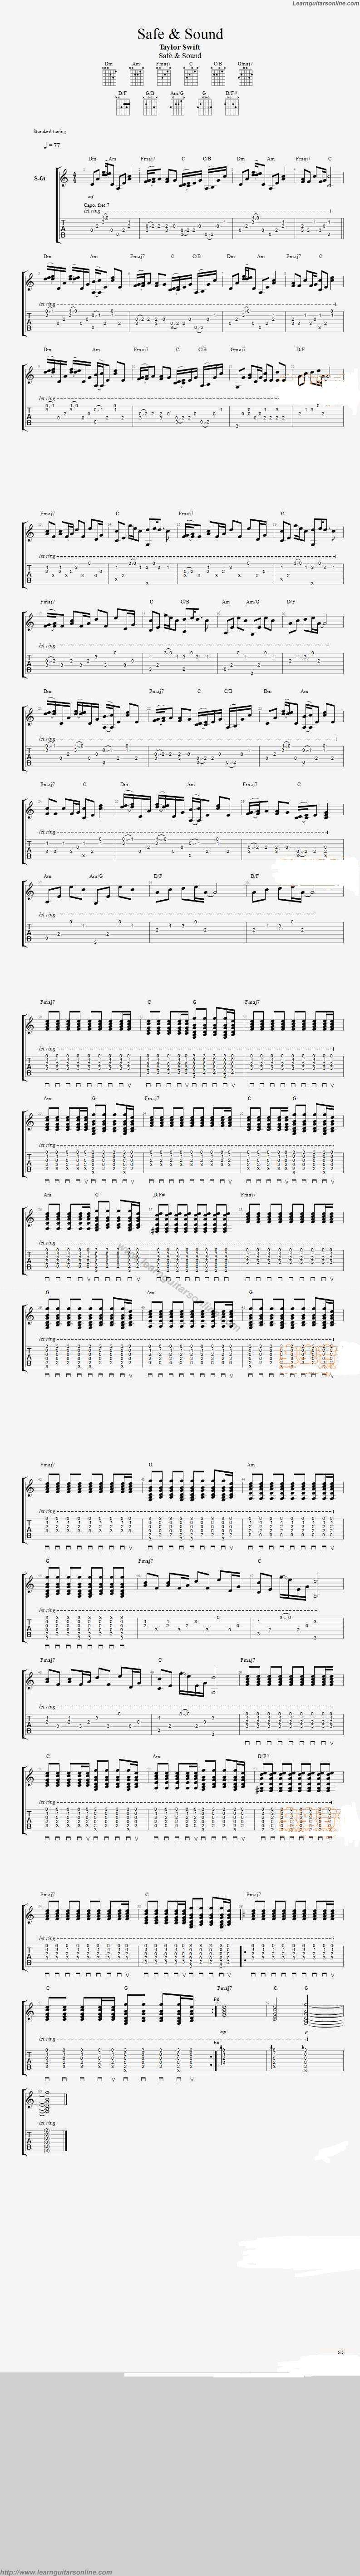 The Civil Wars-Safe & Sound from The Hunger Games by Taylor Swift Guitar Tabs Chords Solo Notes Sheet Music Free